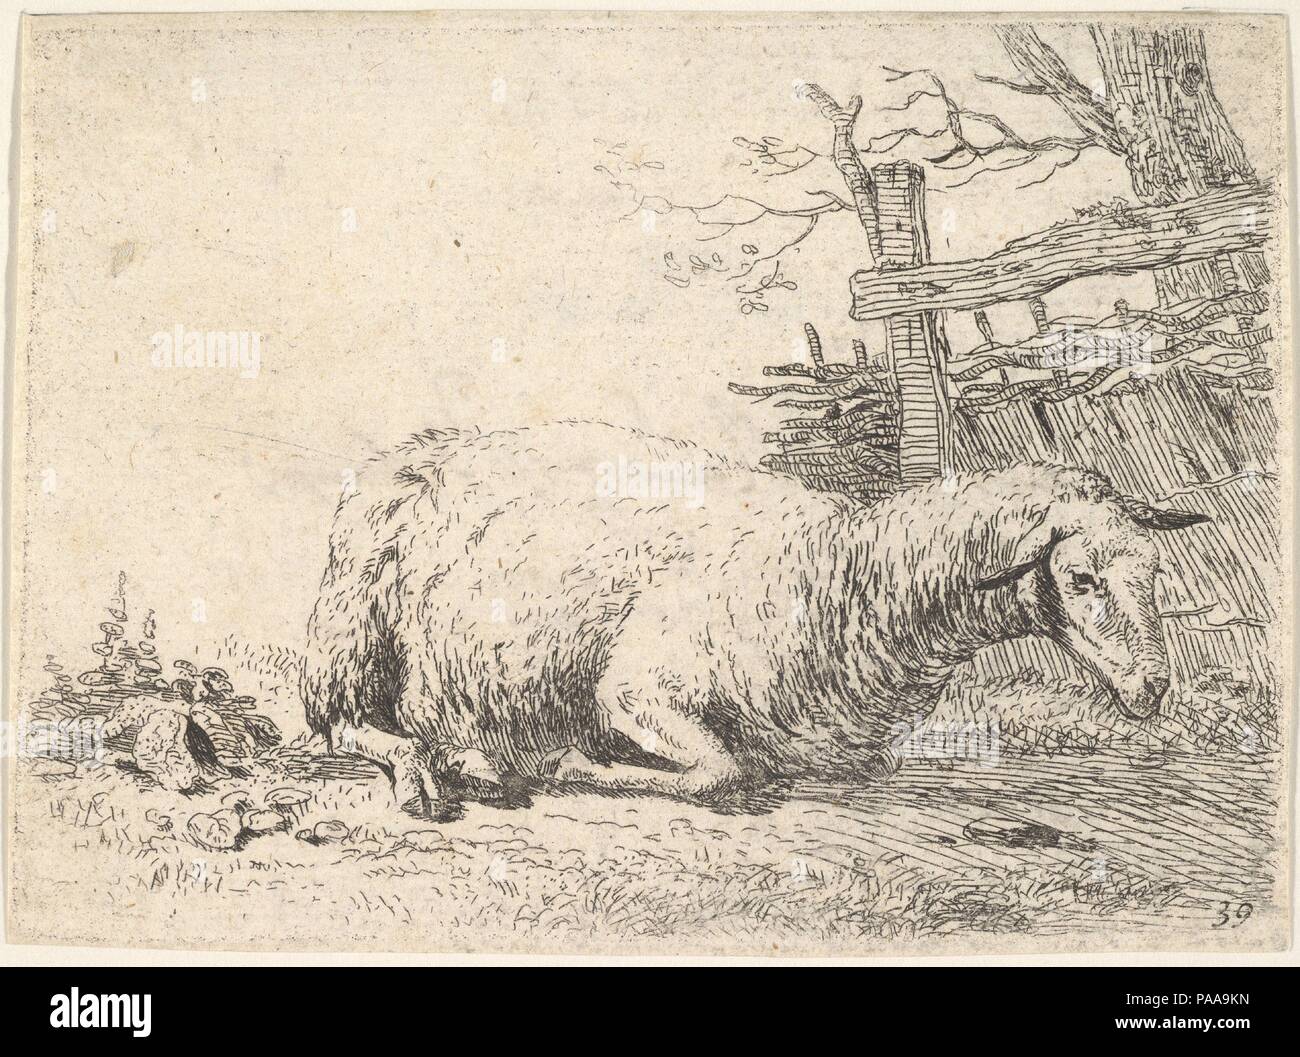 A sheep lying with its legs folded underneath its body next to a wooden fence, the sheep in profile view. Artist: Karel Dujardin (Dutch, Amsterdam 1622-1678 Venice). Dimensions: sheet: 3 x 4 1/8 in. (7.6 x 10.4 cm). Date: ca. 1655. Museum: Metropolitan Museum of Art, New York, USA. Stock Photo